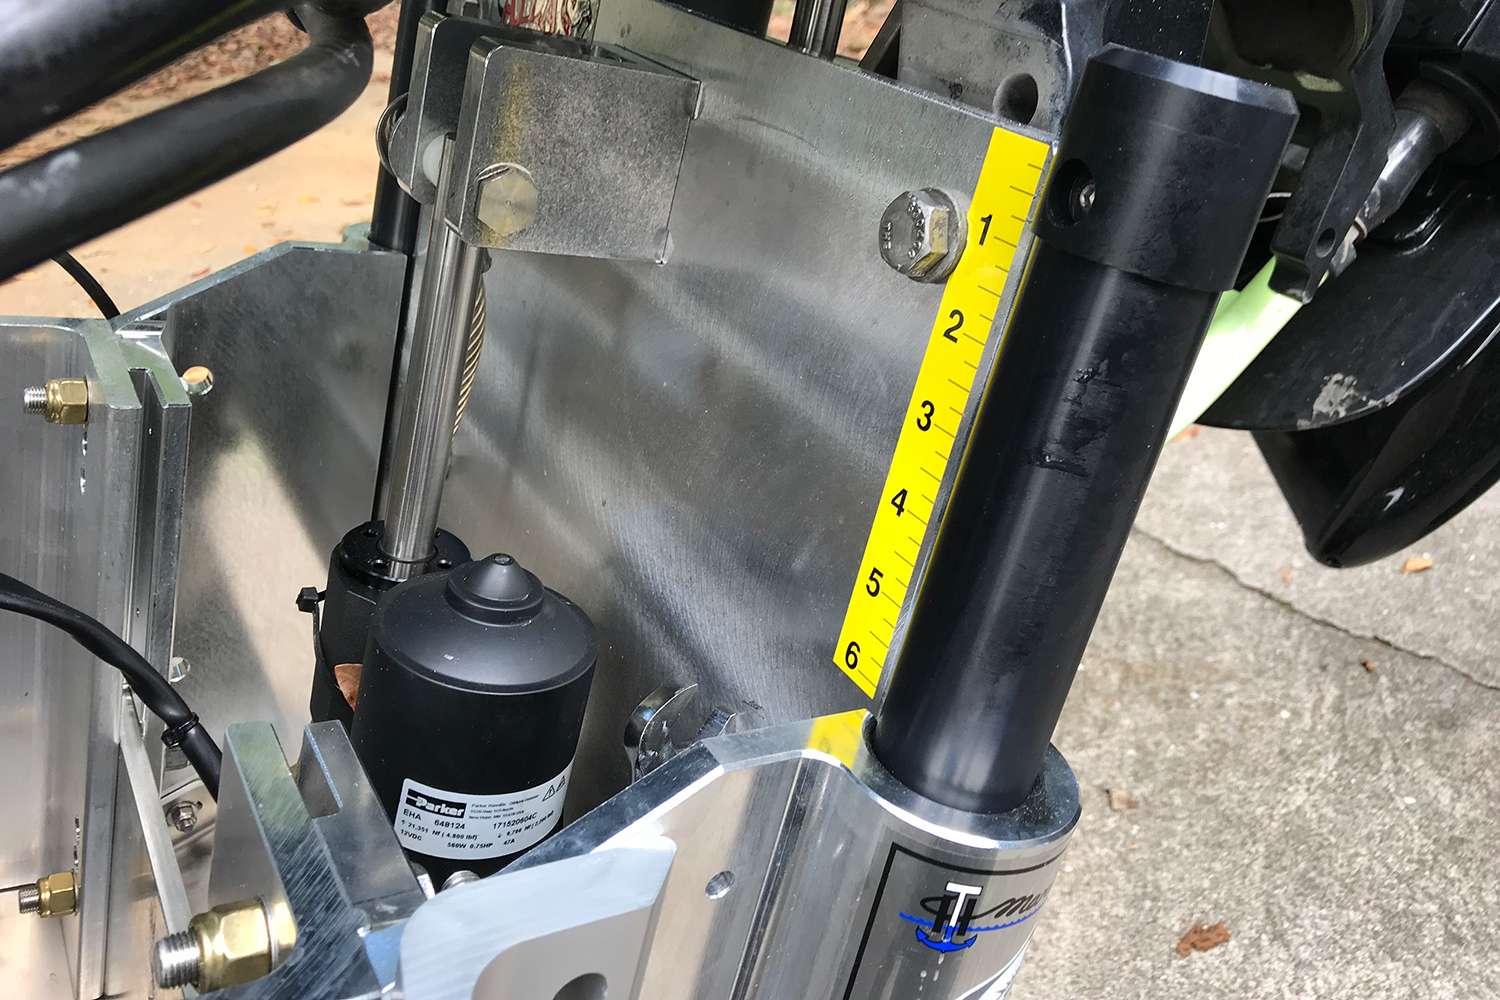 Another reason to get an Atlas hydraulic jackplate, you can raise the motor out of the way when installing Minn Kota Talons. 